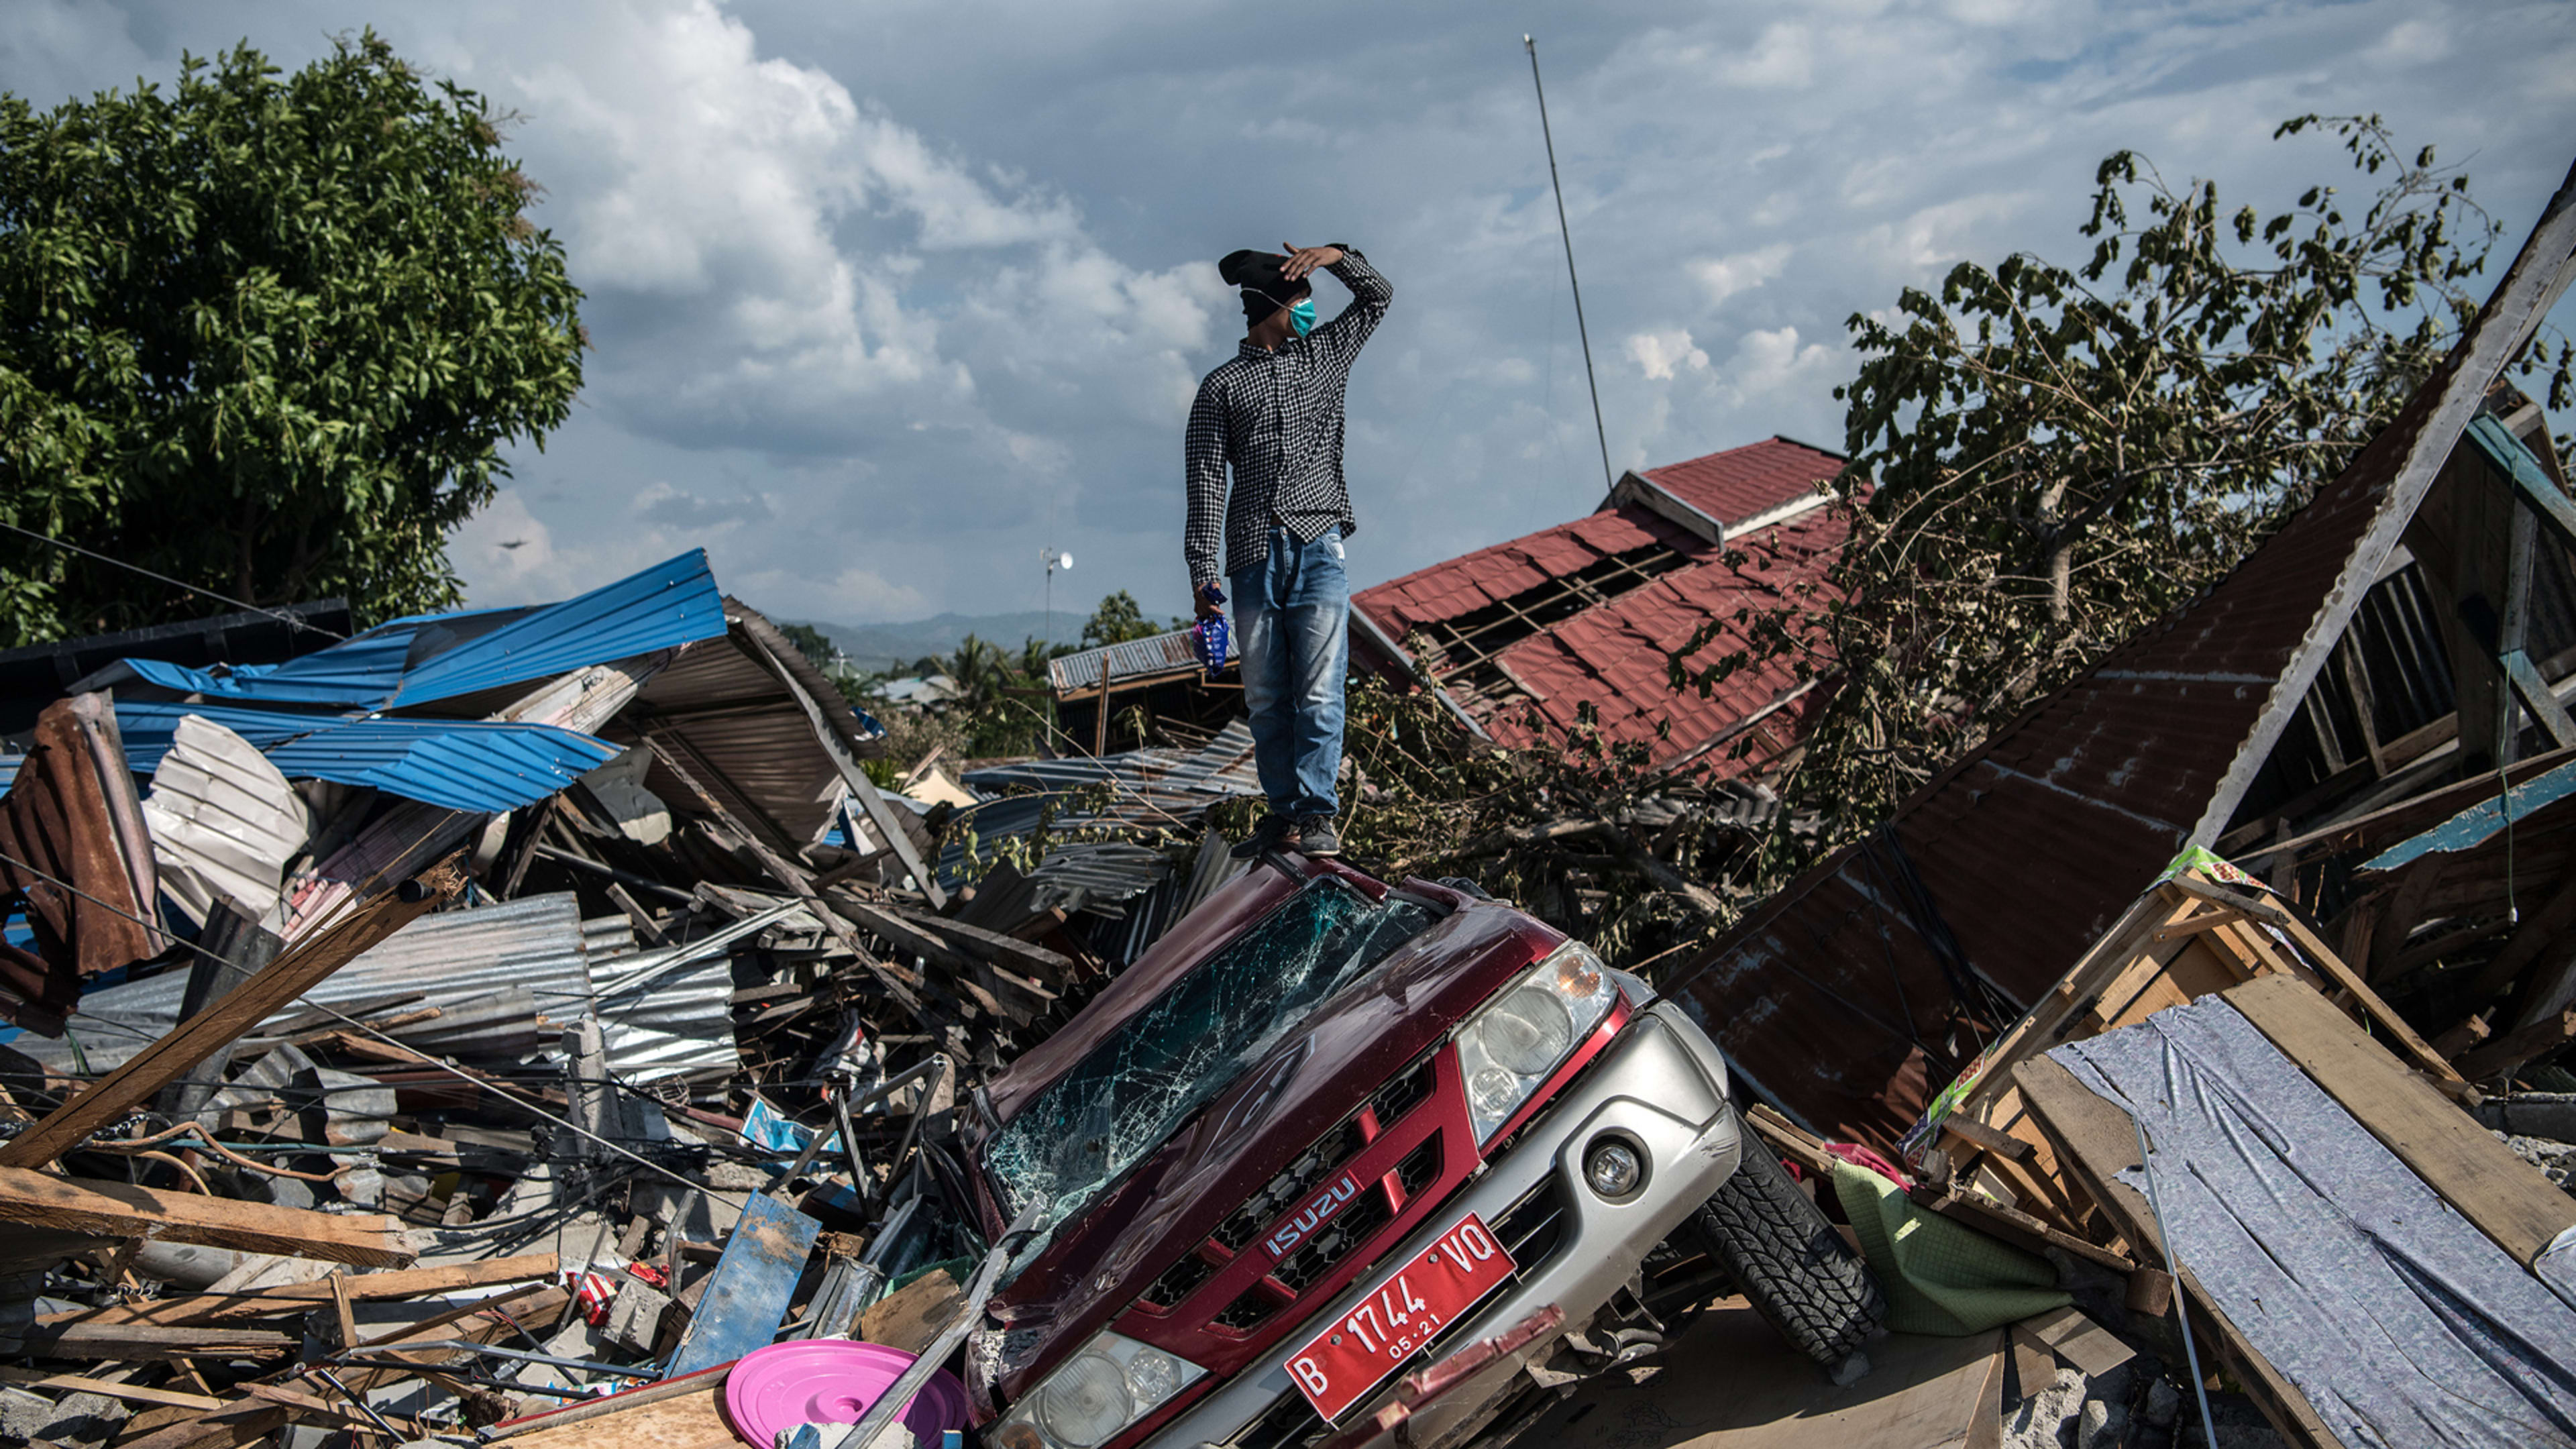 These photos capture the devastation of a year of natural disasters